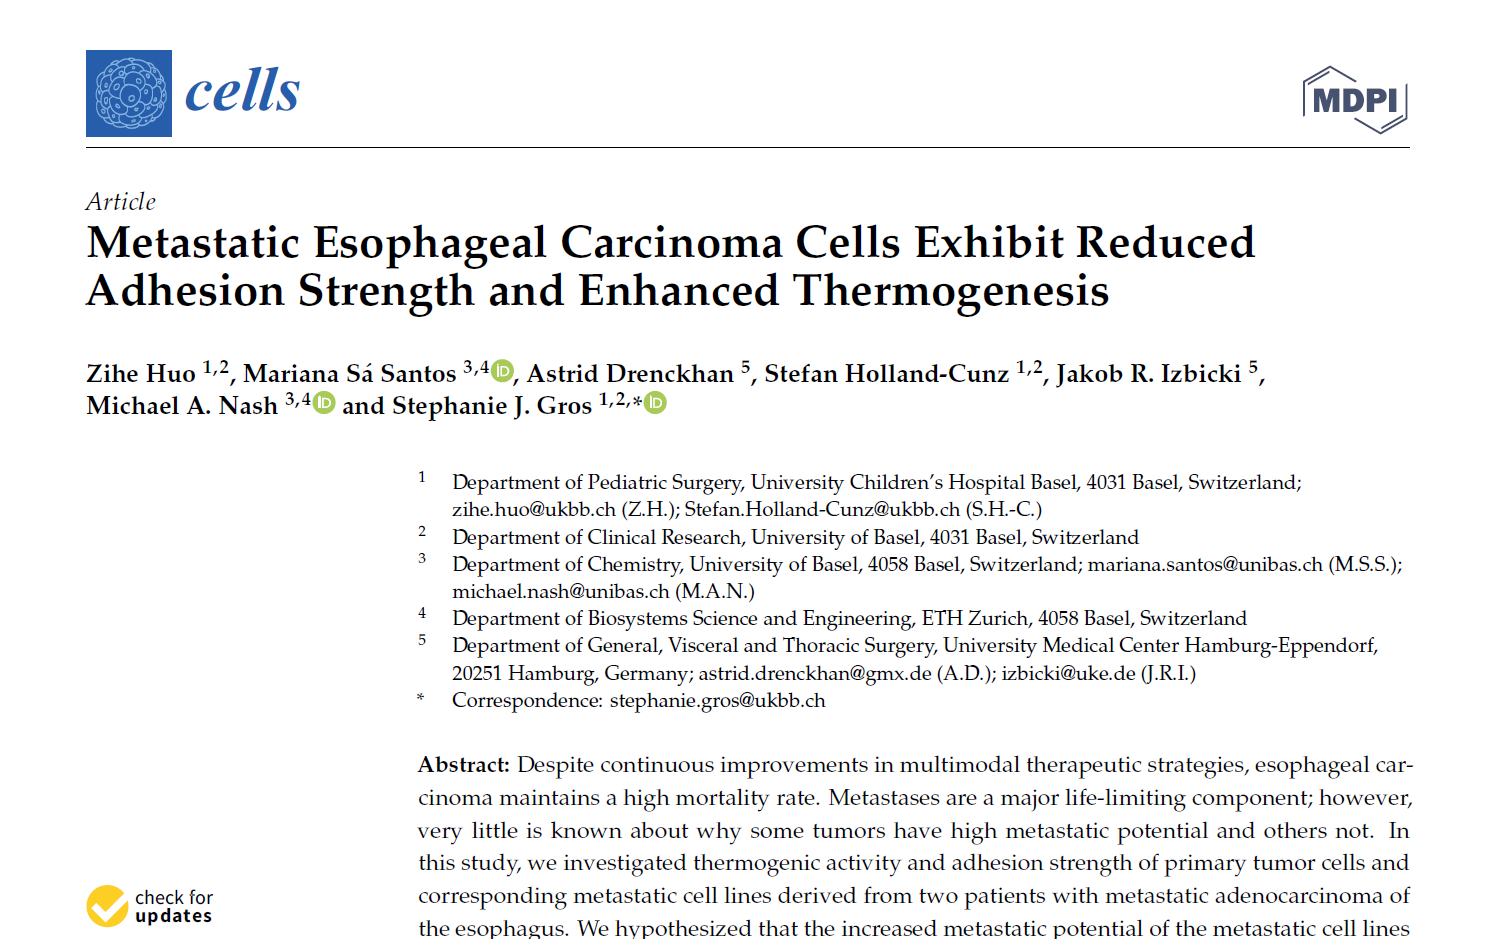 NEW PUBLICATION: Metastatic Esophageal Carcinoma Cells Exhibit Reduced Adhesion Strength and Enhanced Thermogenesis